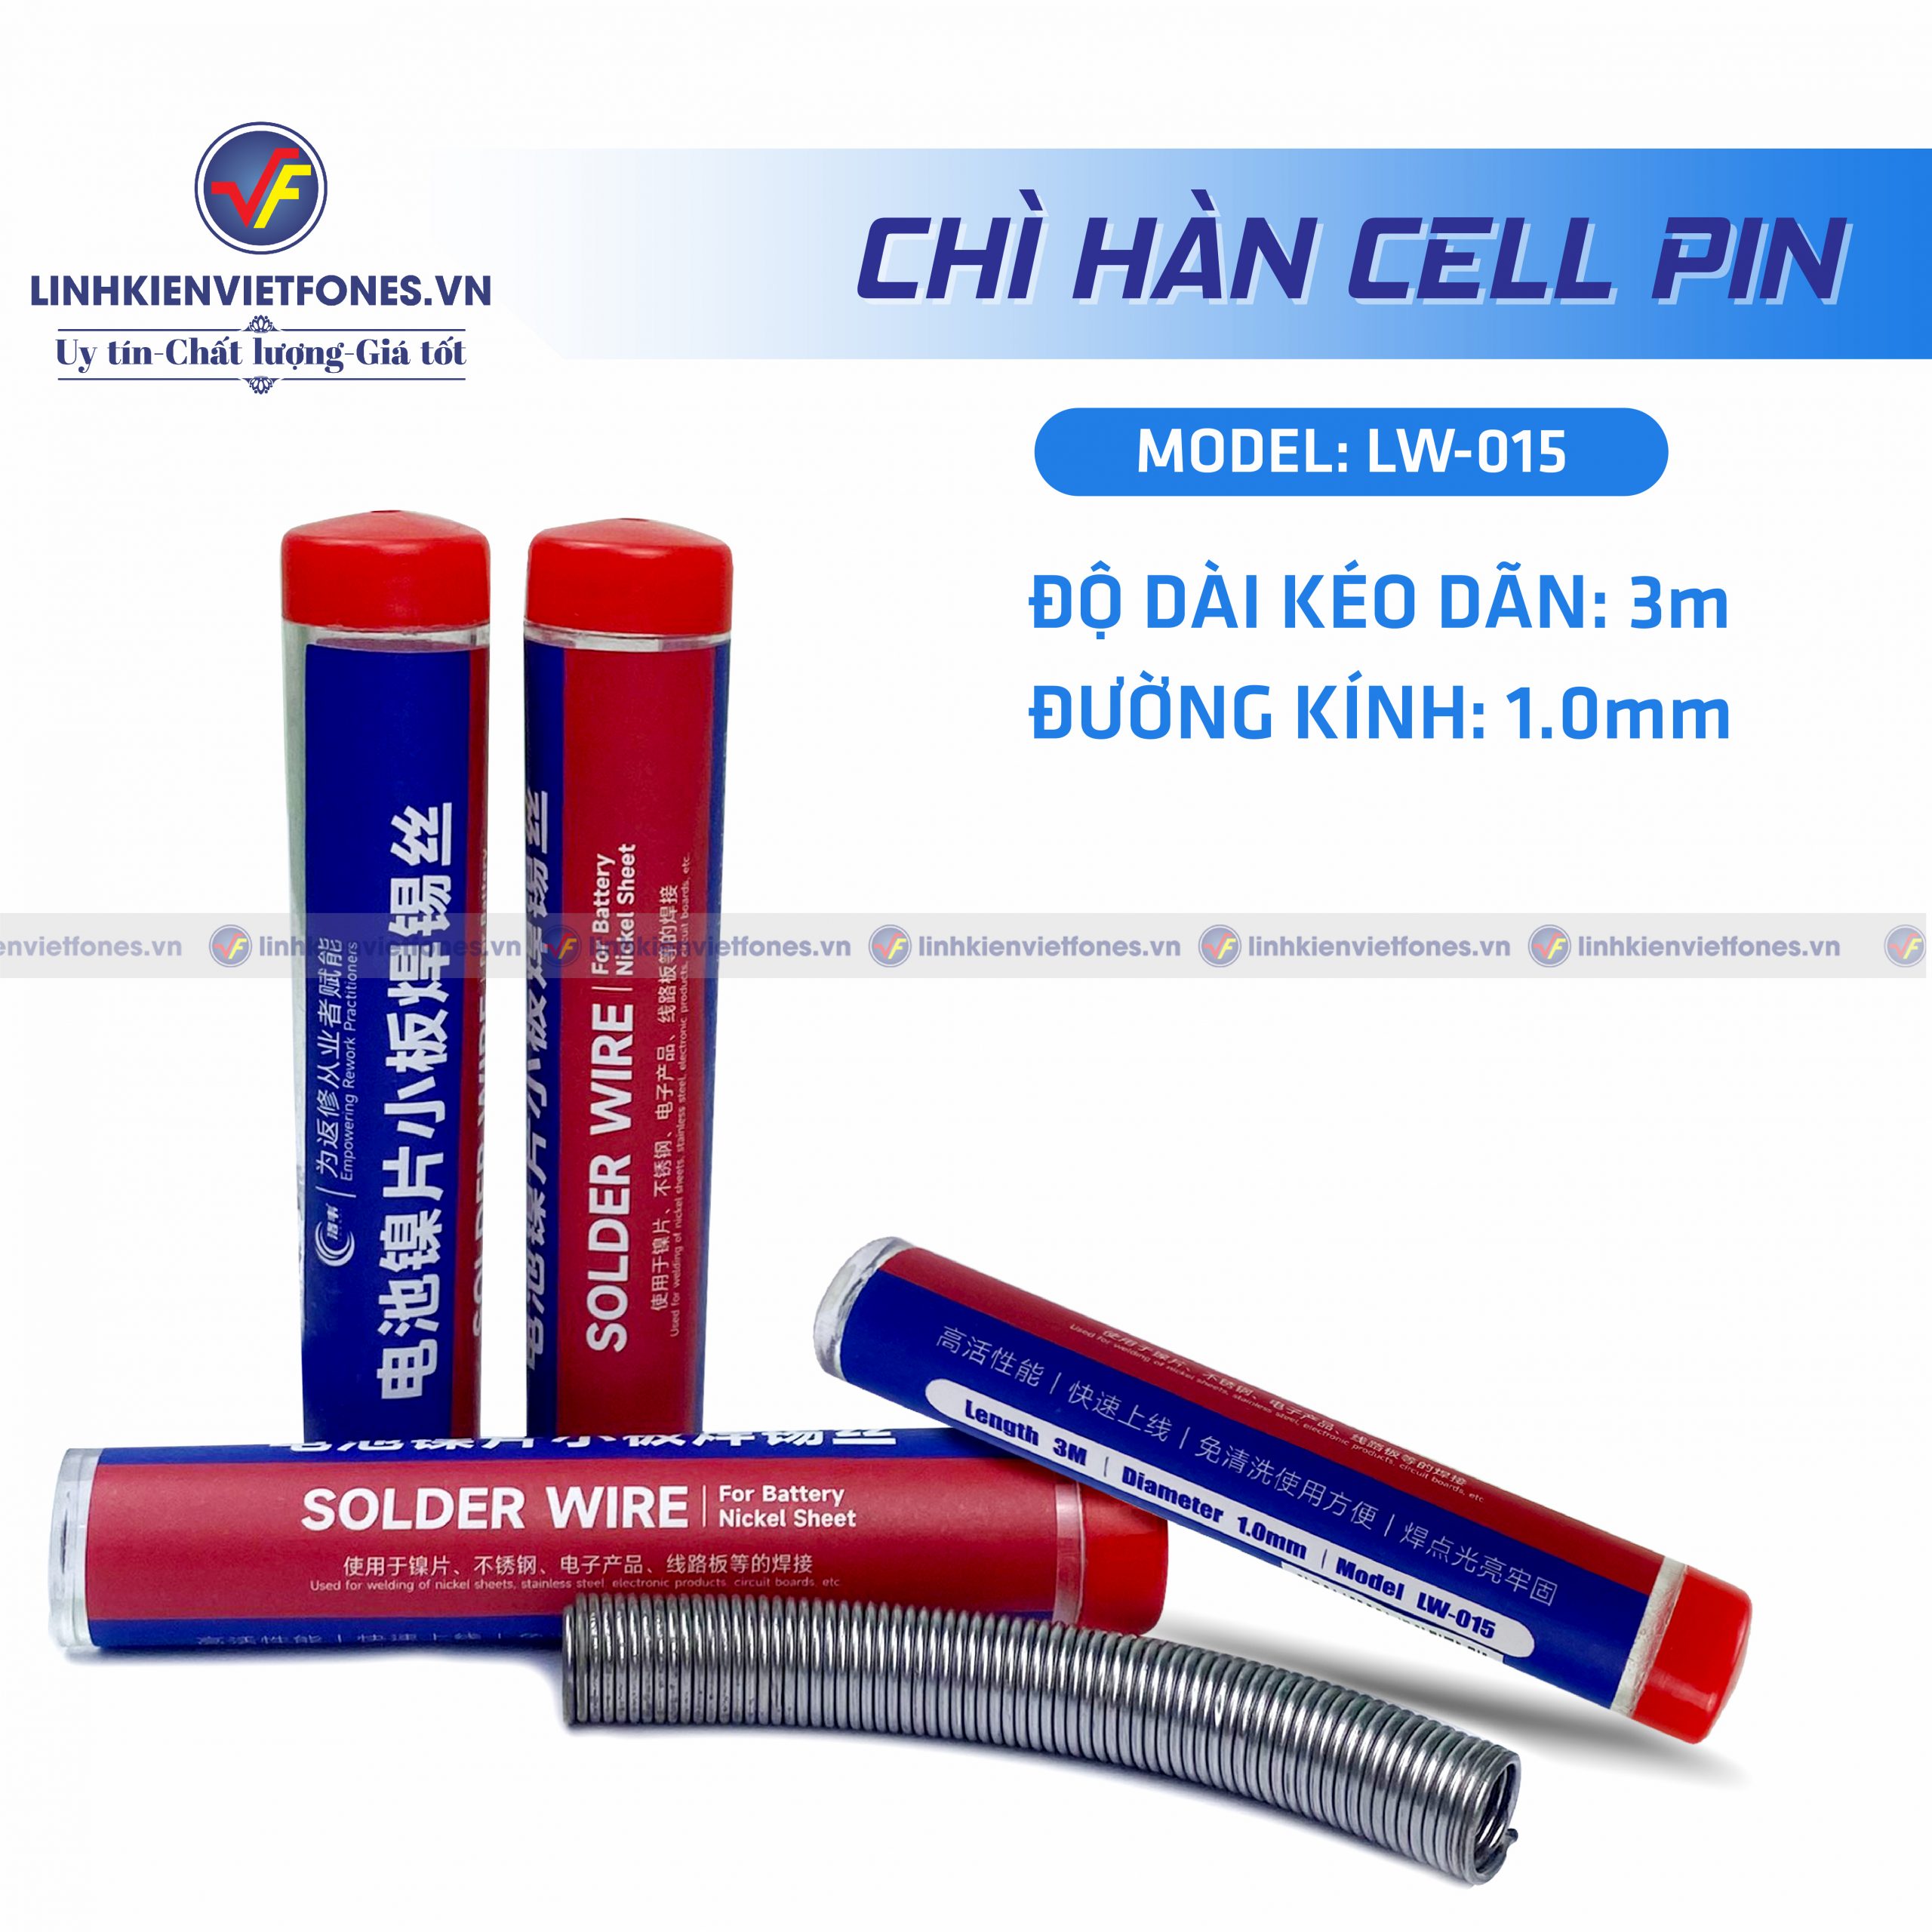 chi han cell pin 2 1 scaled